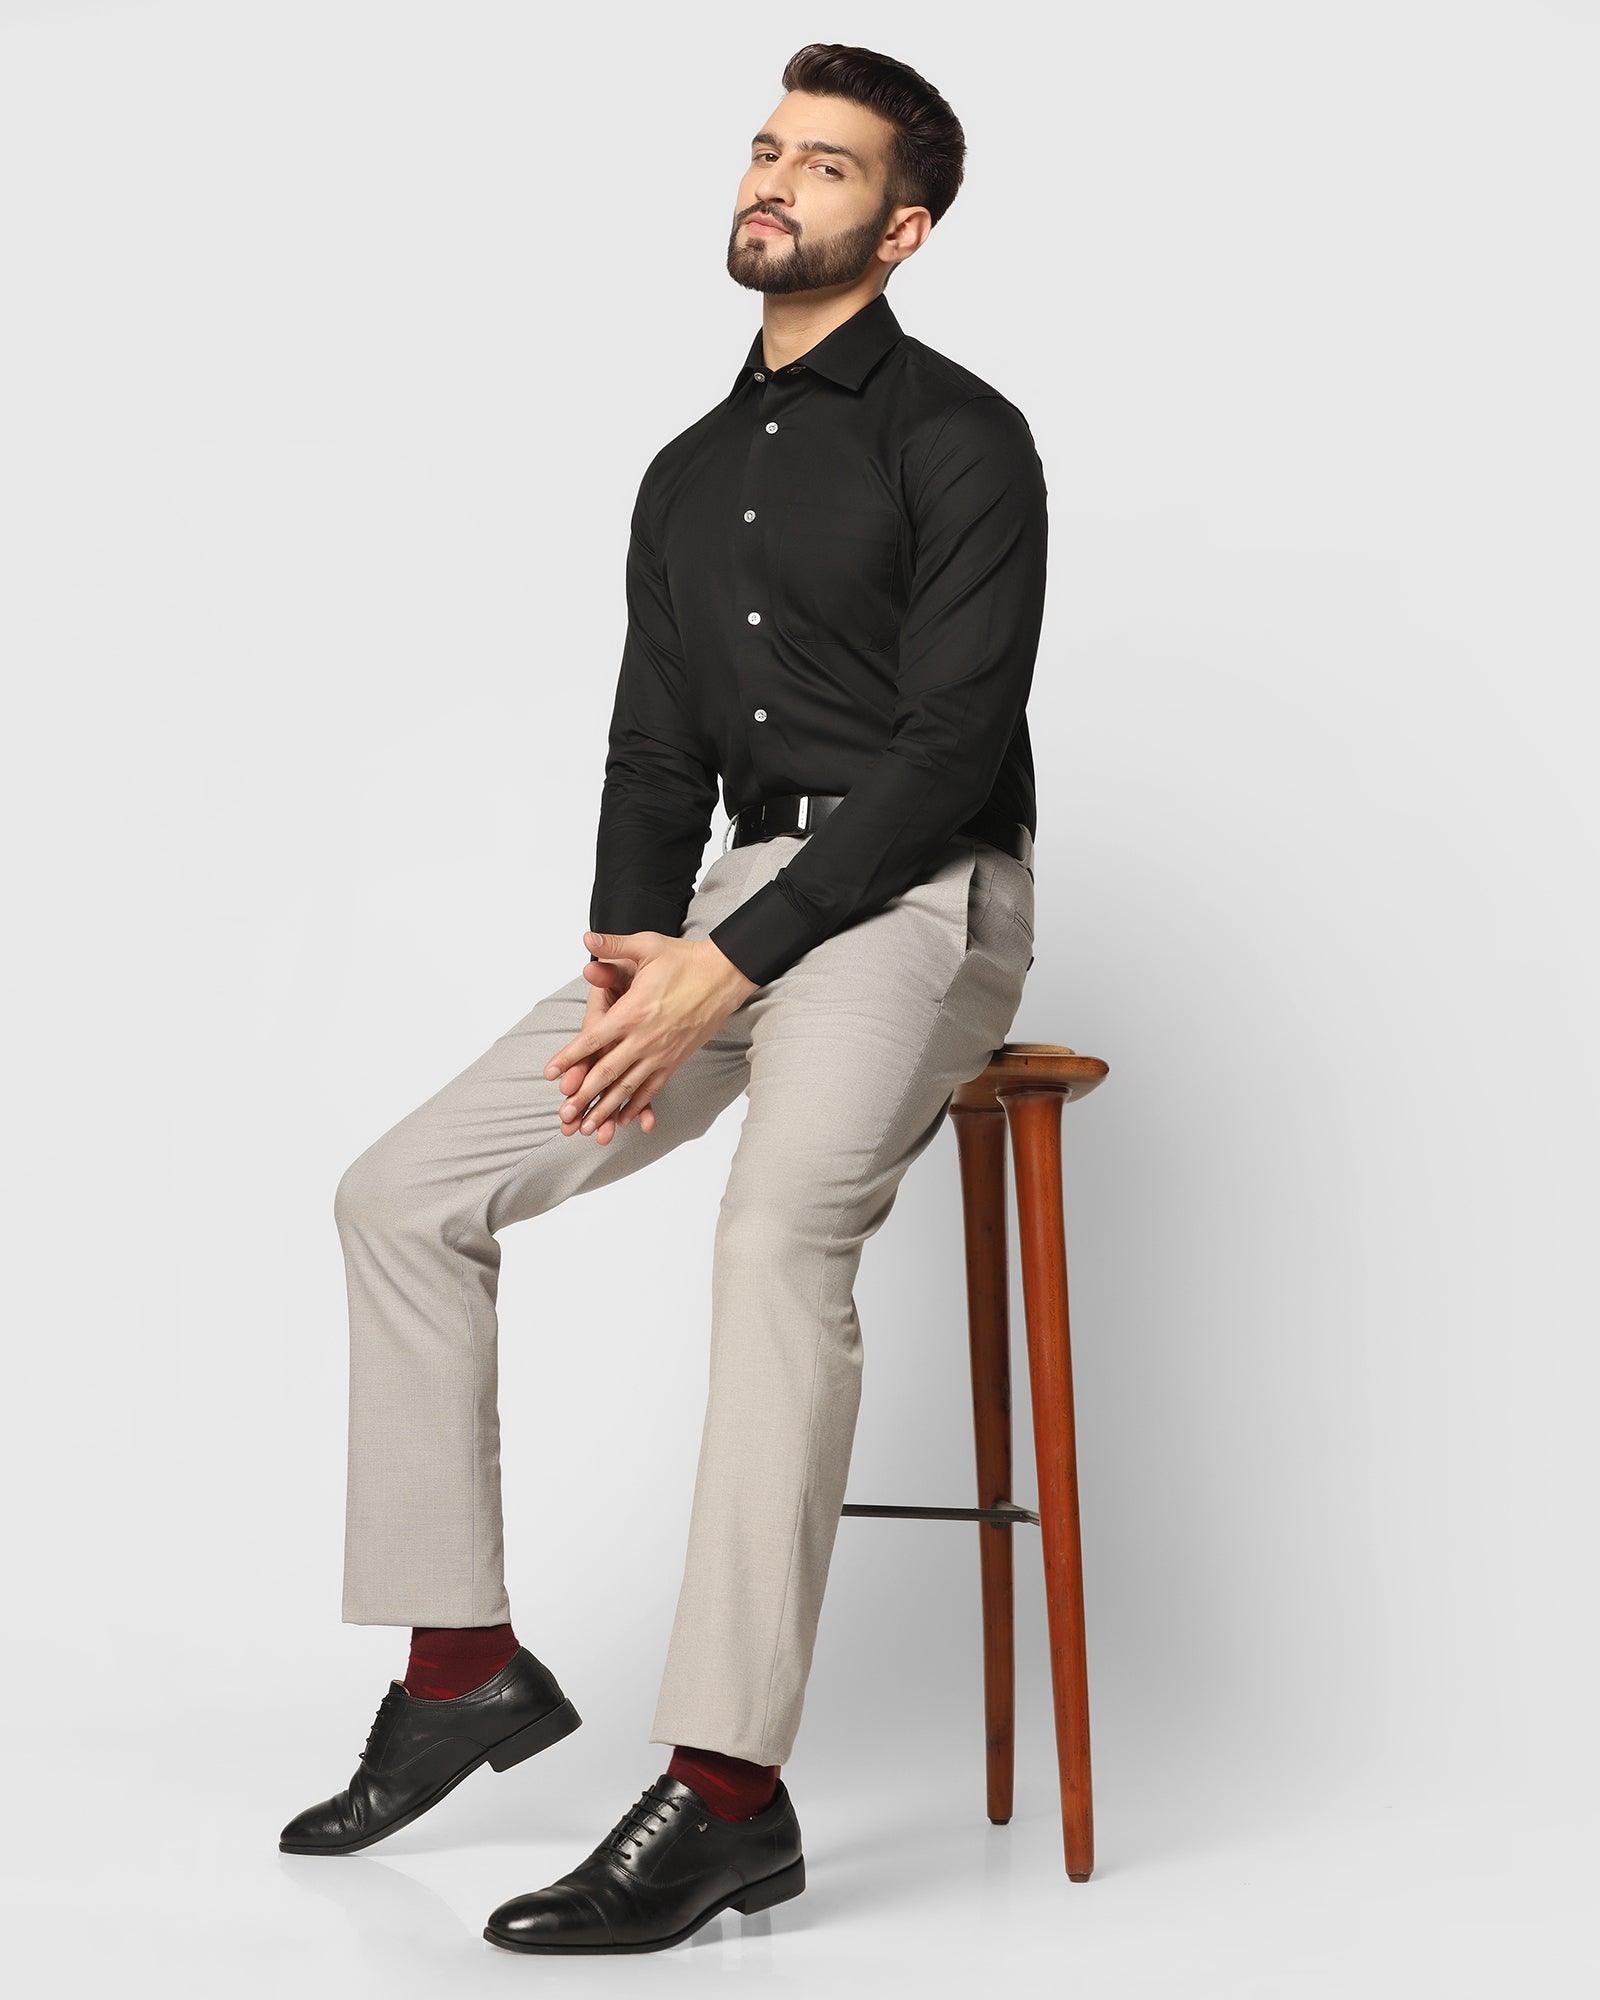 Men's Black Short Sleeve Shirt, Khaki Chinos, Brown Leather Derby Shoes |  Lookastic